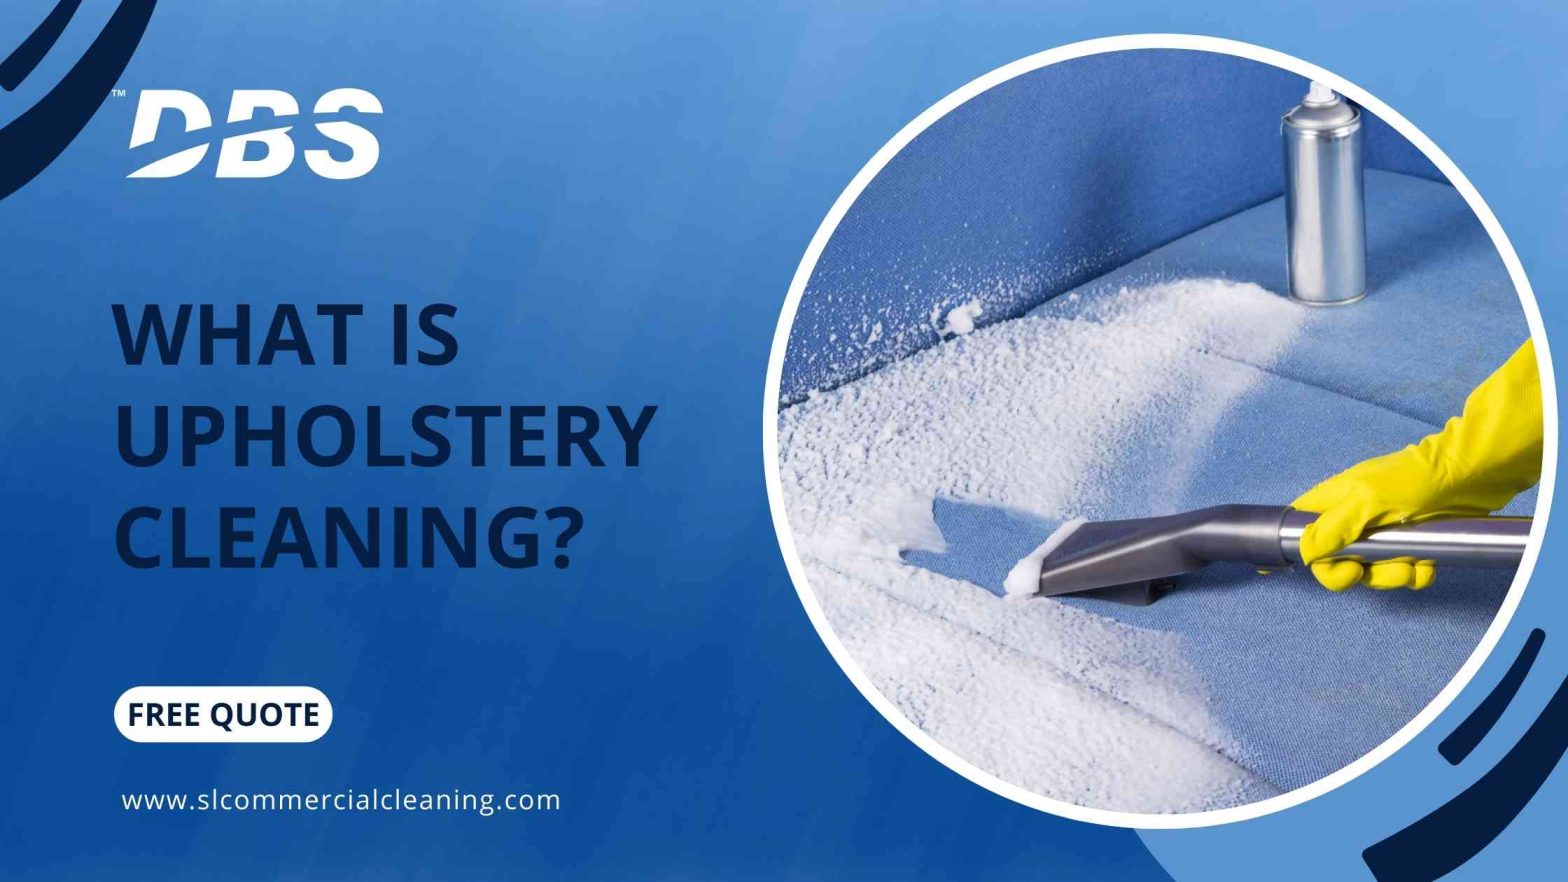 What is Upholstery Cleaning